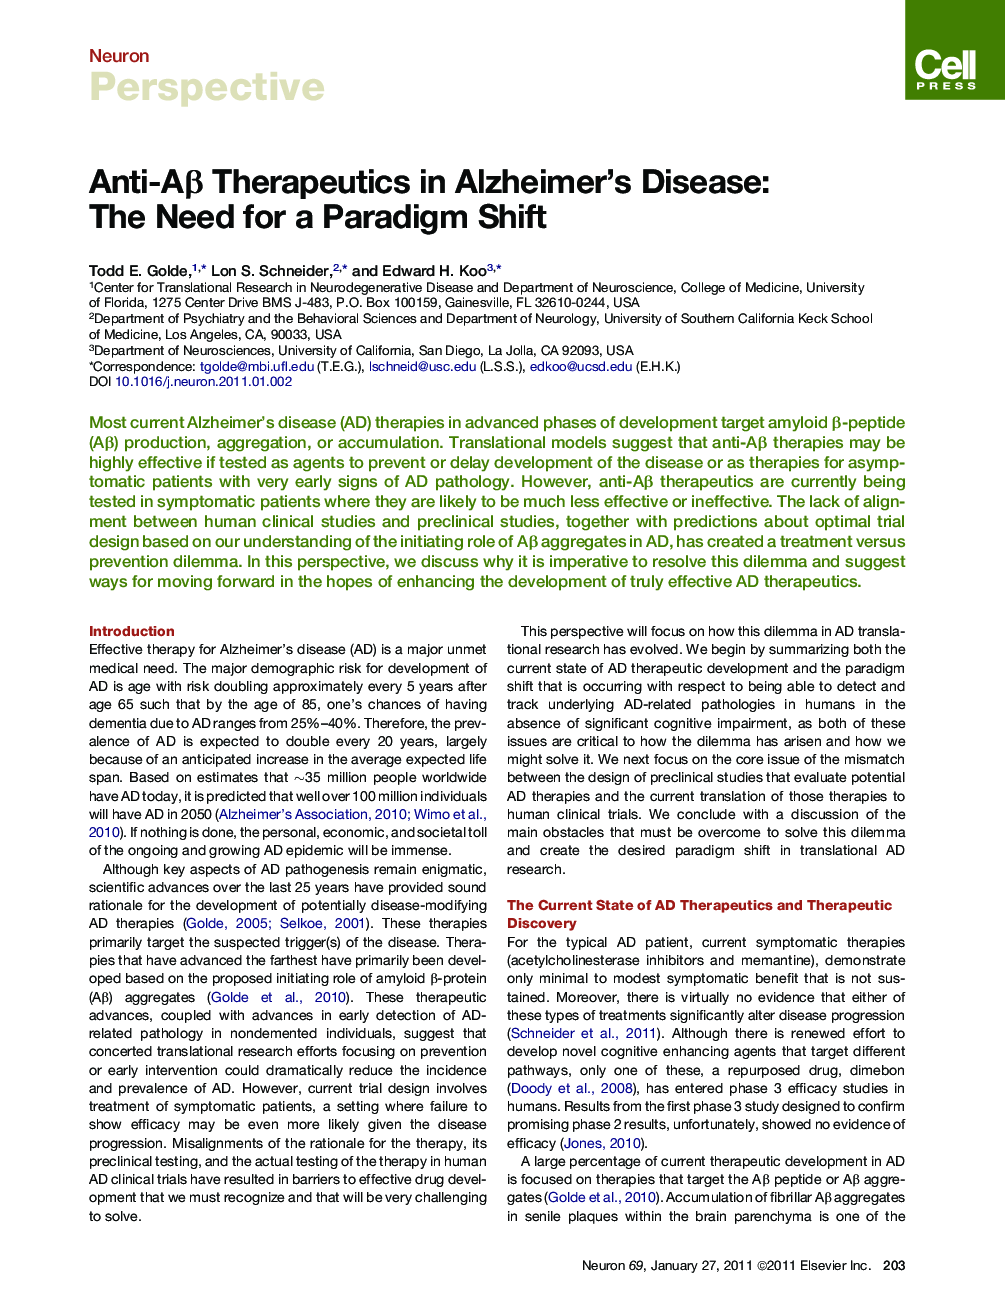 Anti-Aβ Therapeutics in Alzheimer's Disease: The Need for a Paradigm Shift